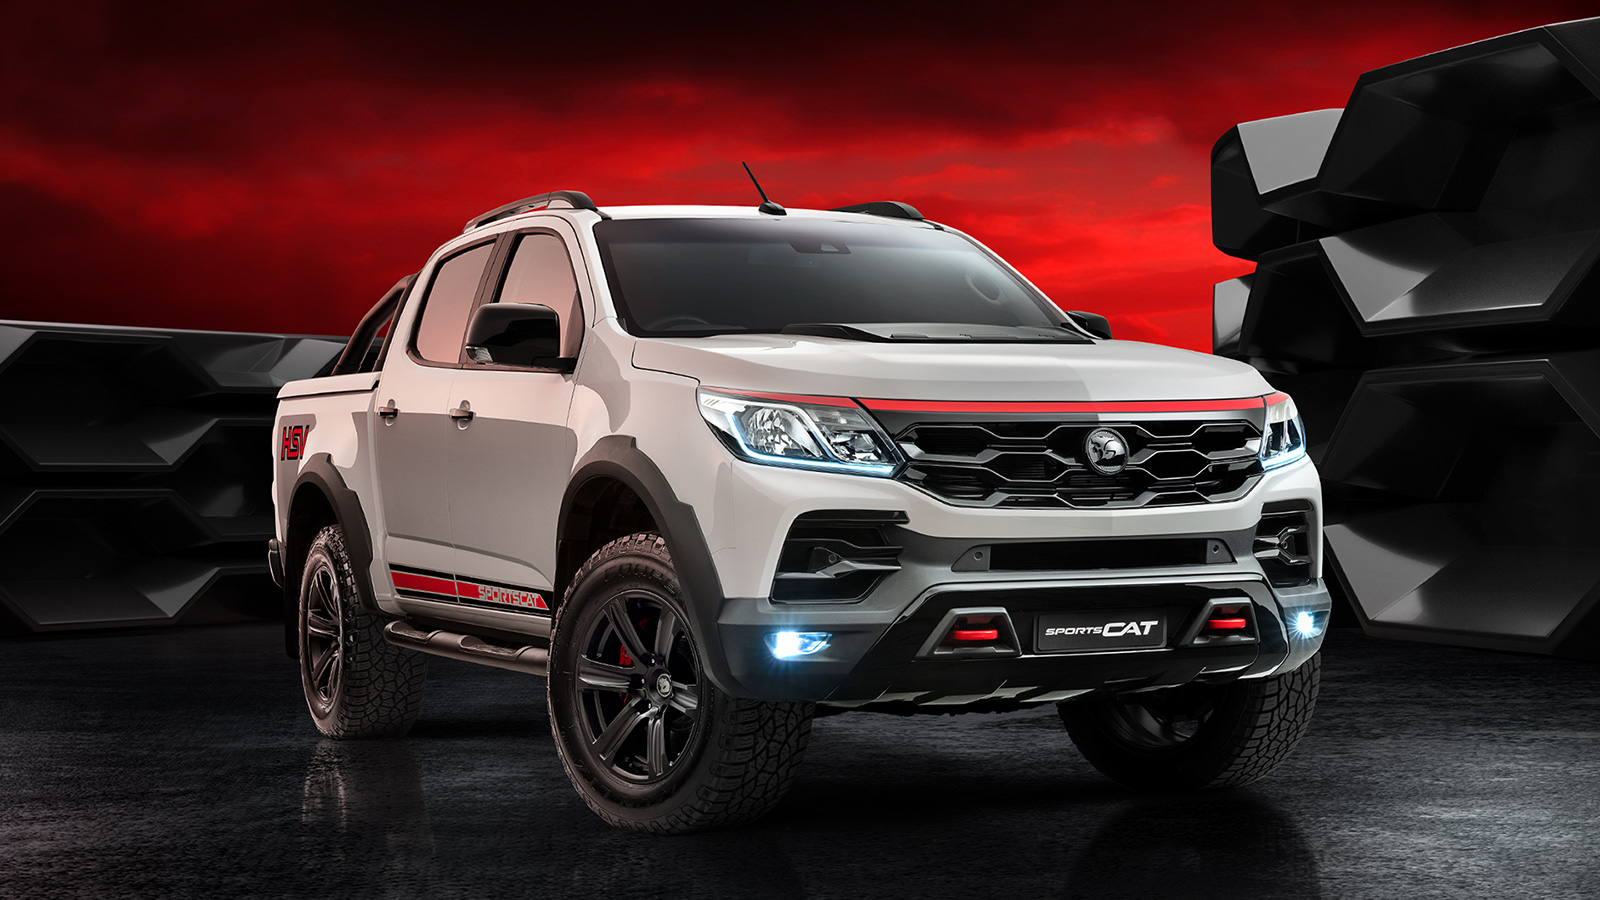 HSV Releases Limited Edition SportsCat 4x4